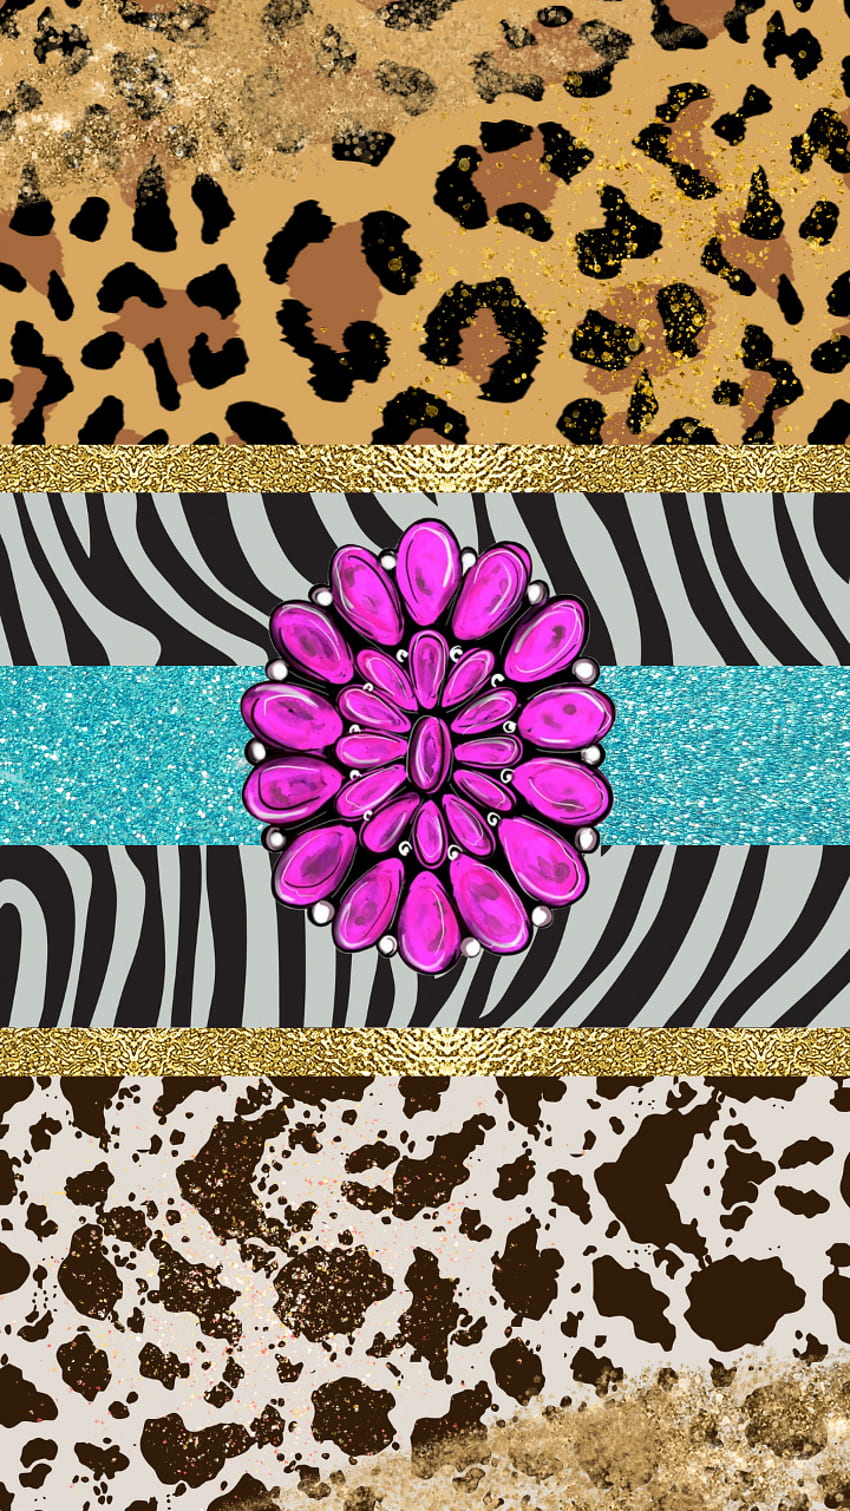 720P Free download | Western Turquoise, gold, zebra, leopard, pink ...